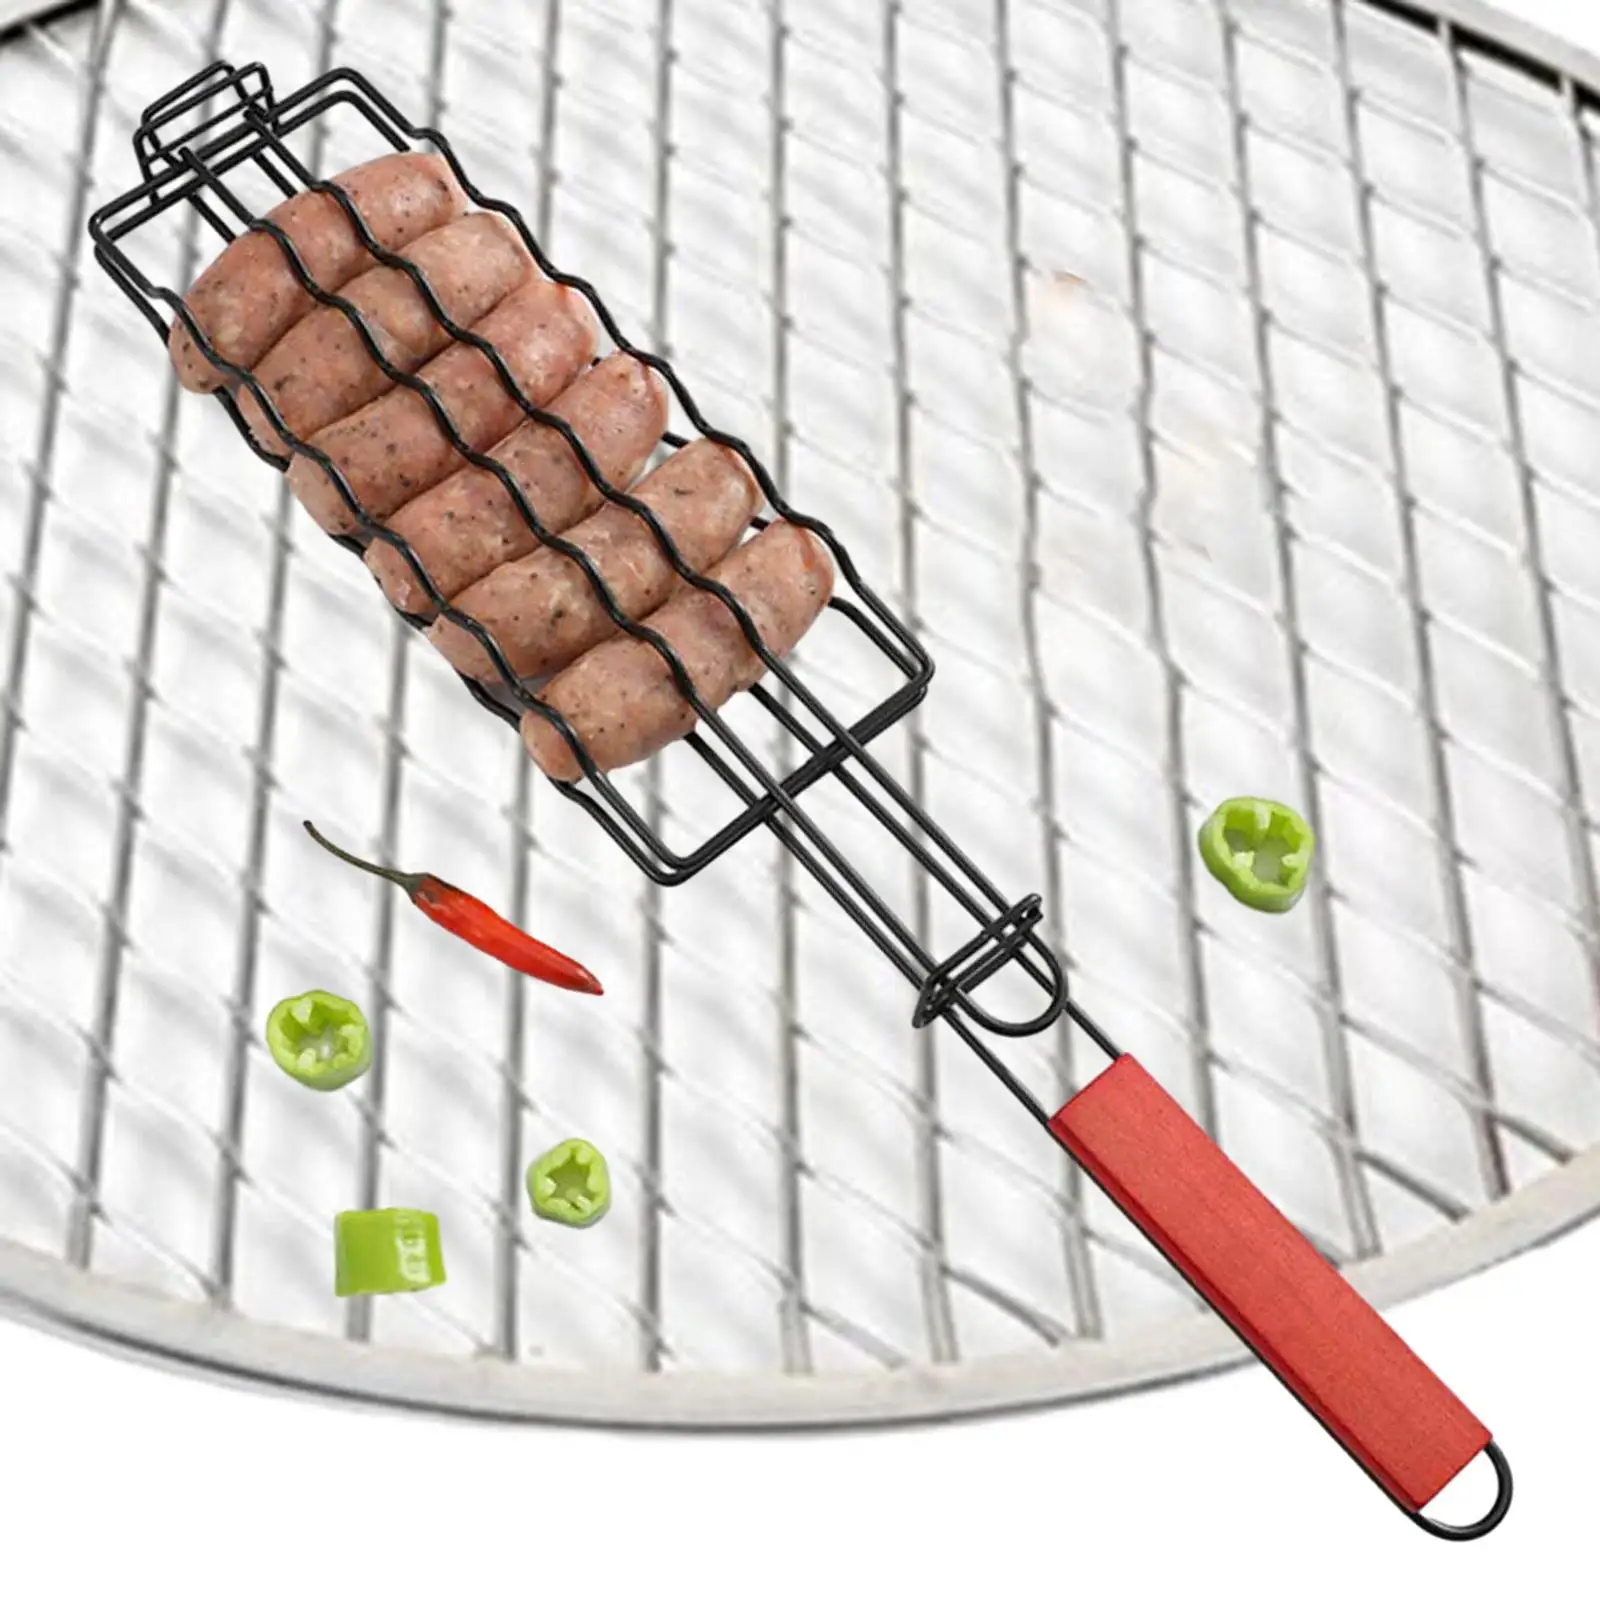 Hot Dogs Grilling Basket Metal Barbecue Sausage Rack Grill Mesh Clip Holder for Grilling Vegetables Diced Meat Outdoor Onion